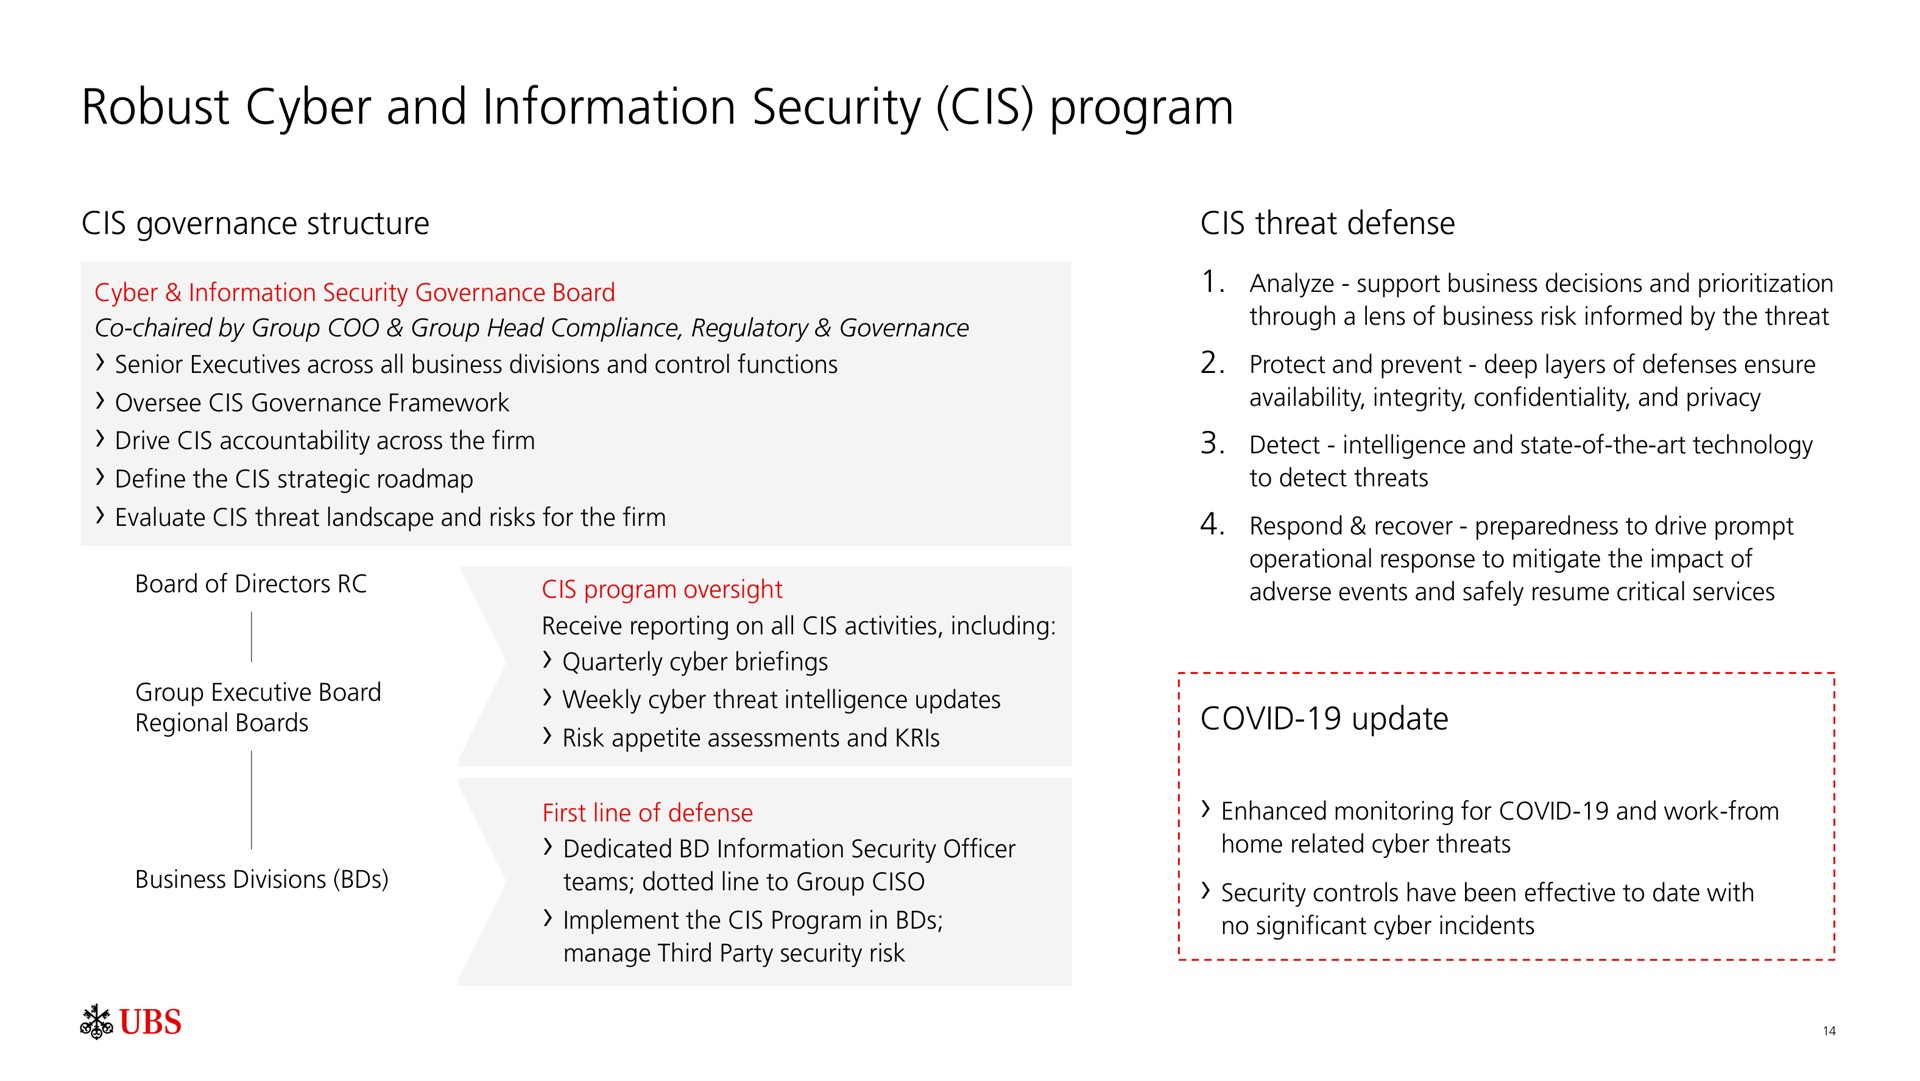 robust and information security program | UBS